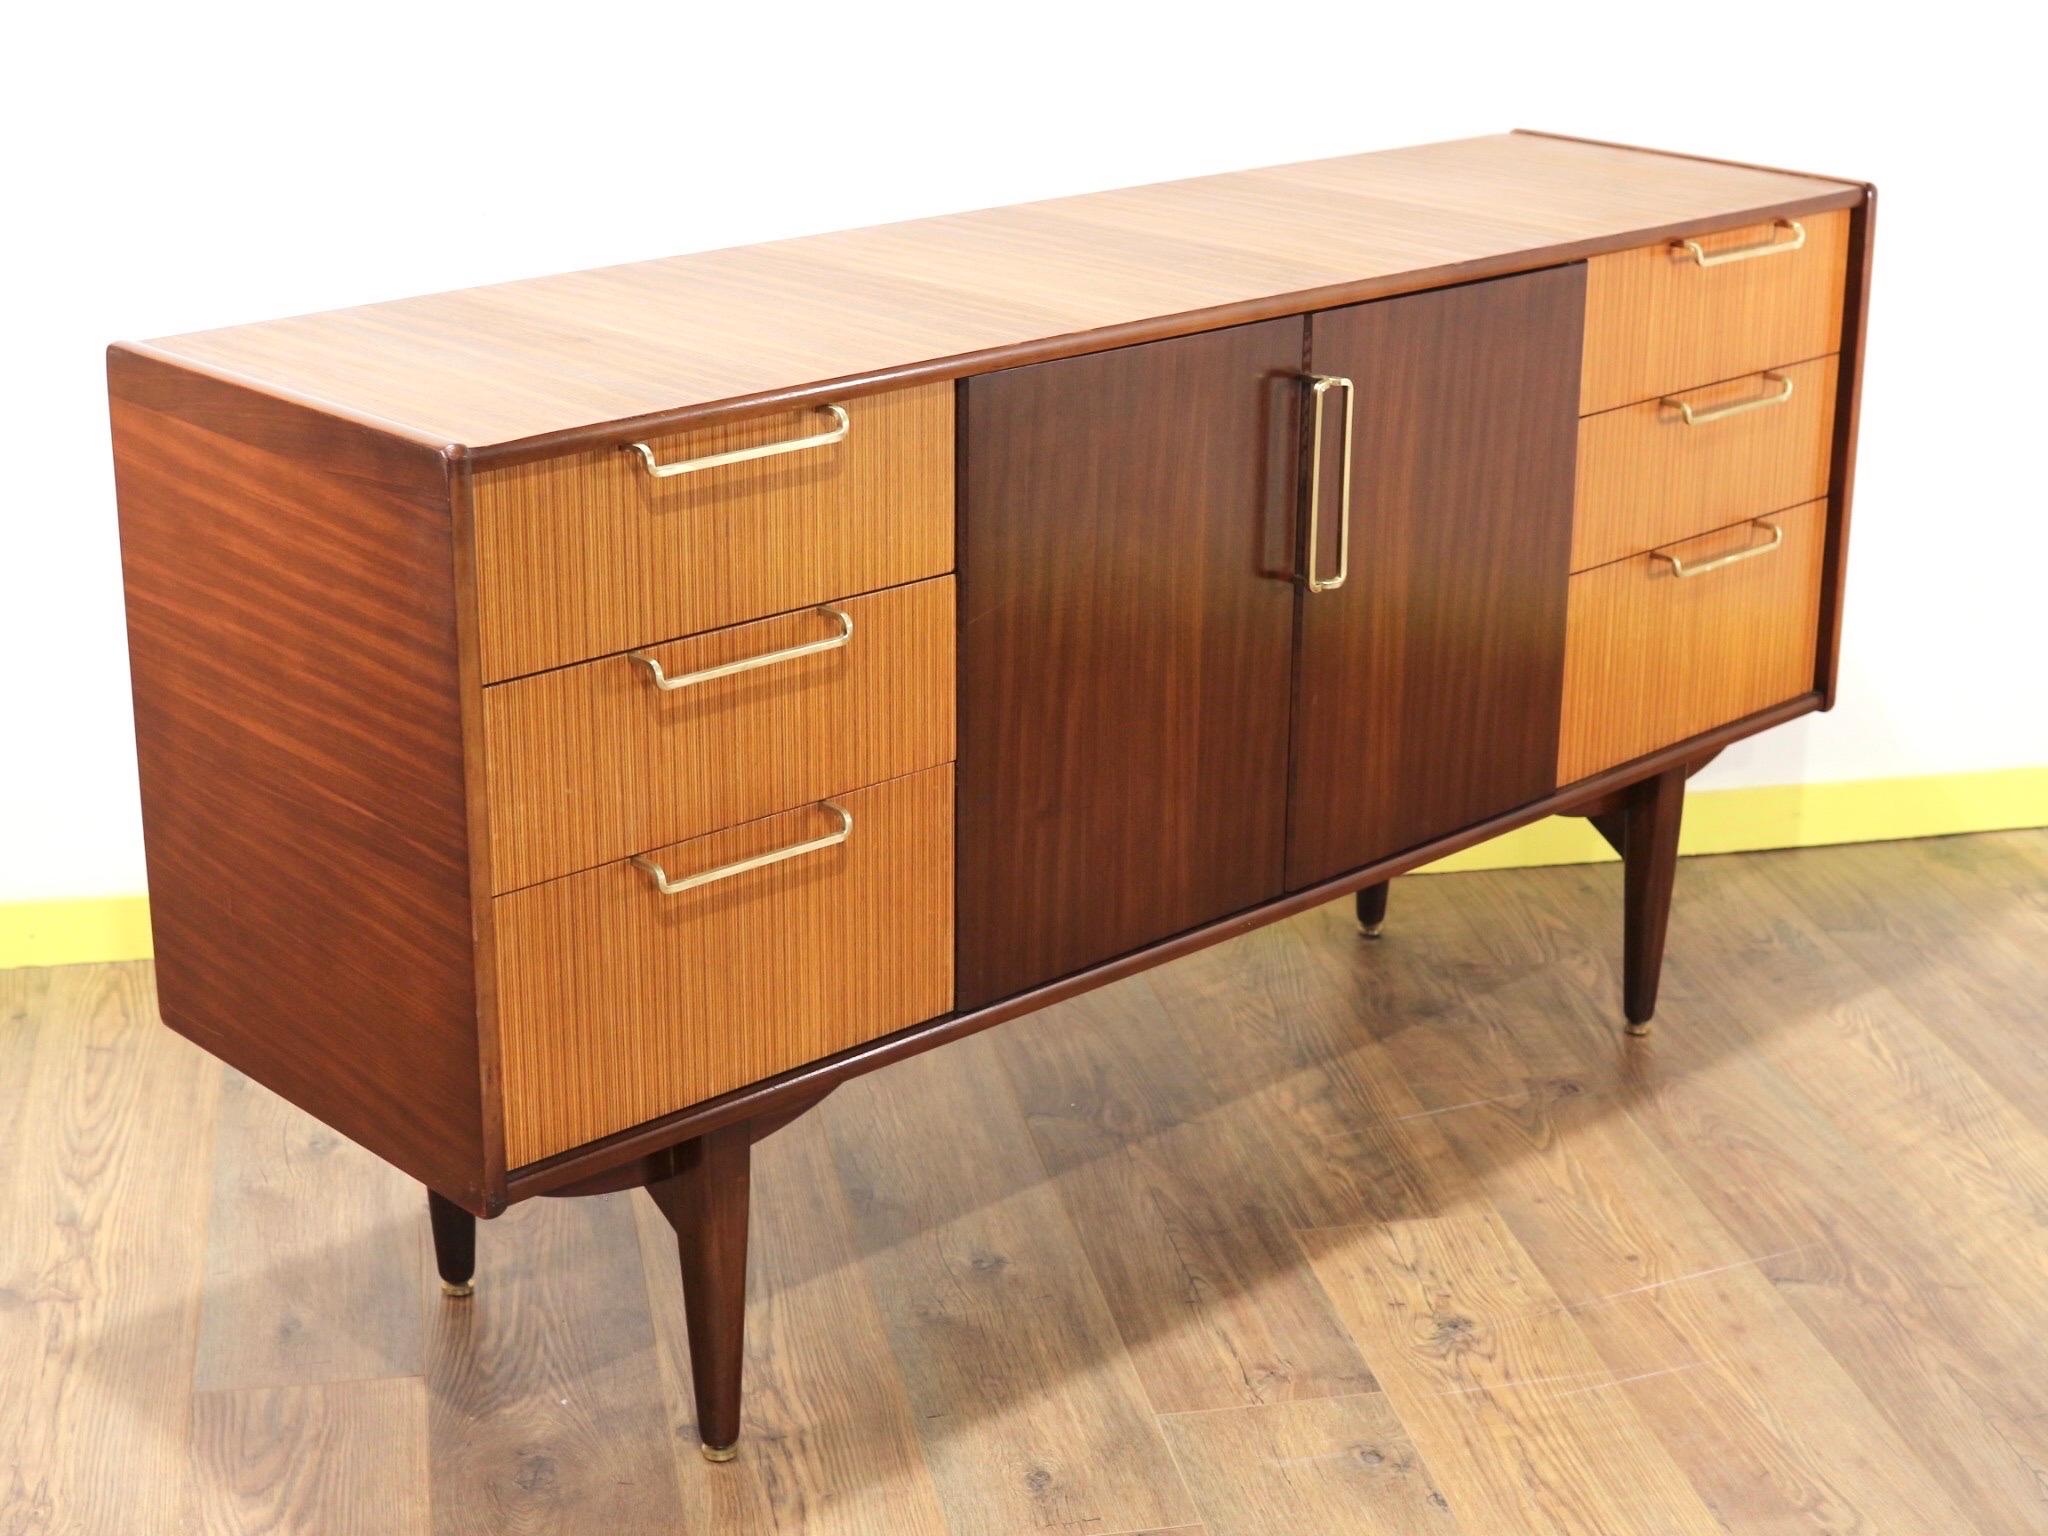 Mid-century credenza produced in England during the 1960s by Beutility.
This walnut credenza has central cabinet space which is flanked by three ash drawers with brass pulls either side. The credenza itself is walnut and stands on its original